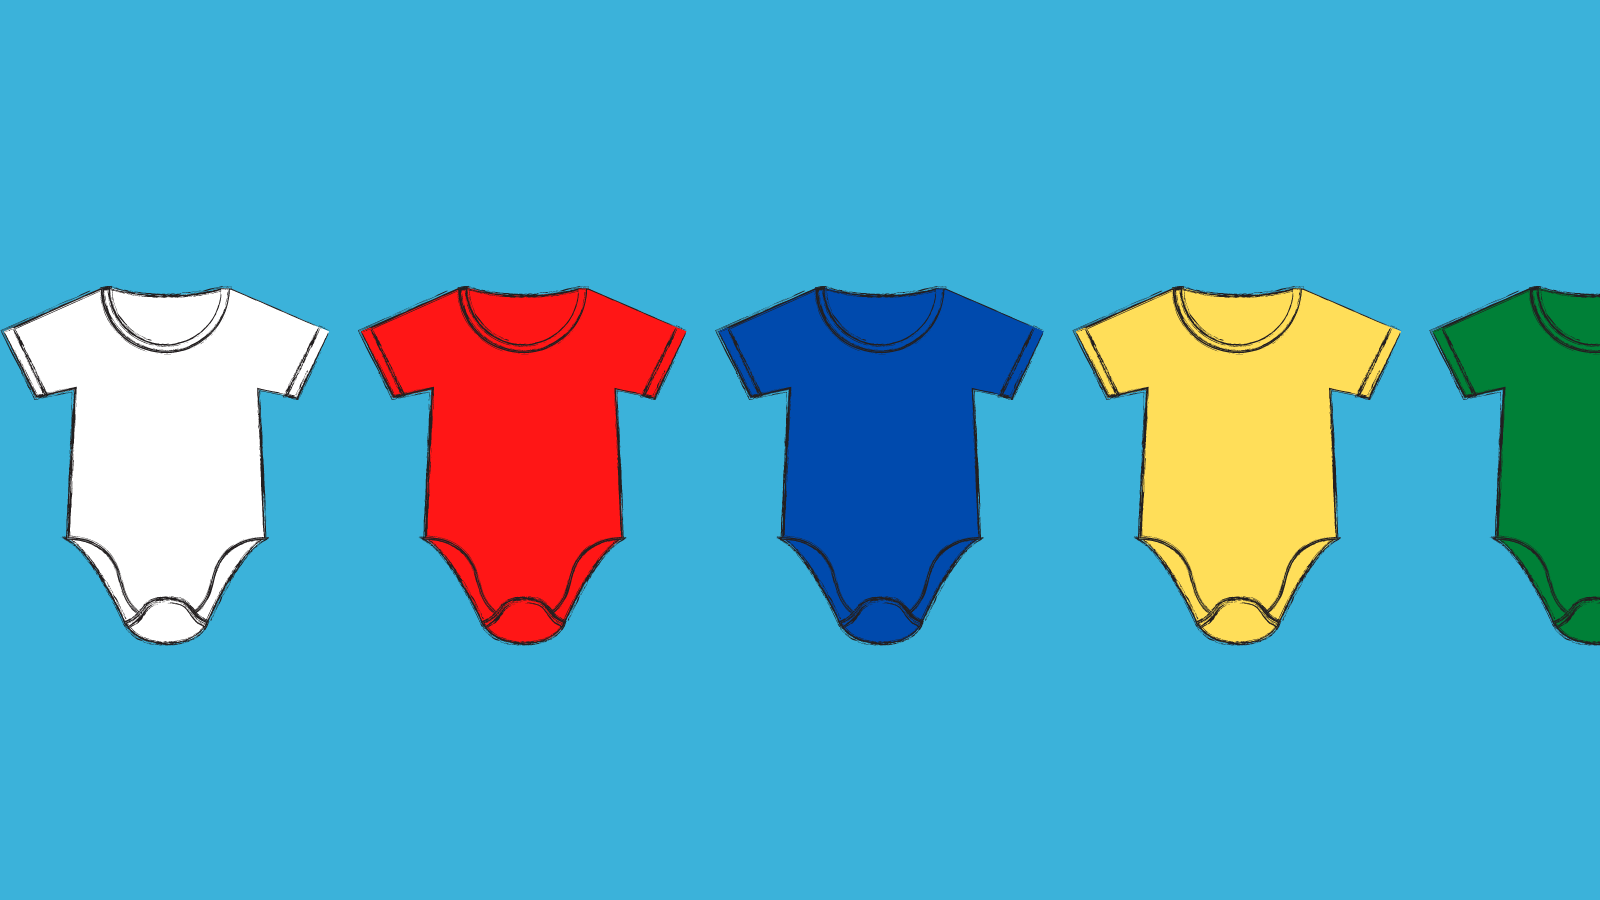 Five baby onesies one white, one red, one blue, one yellow, and one green